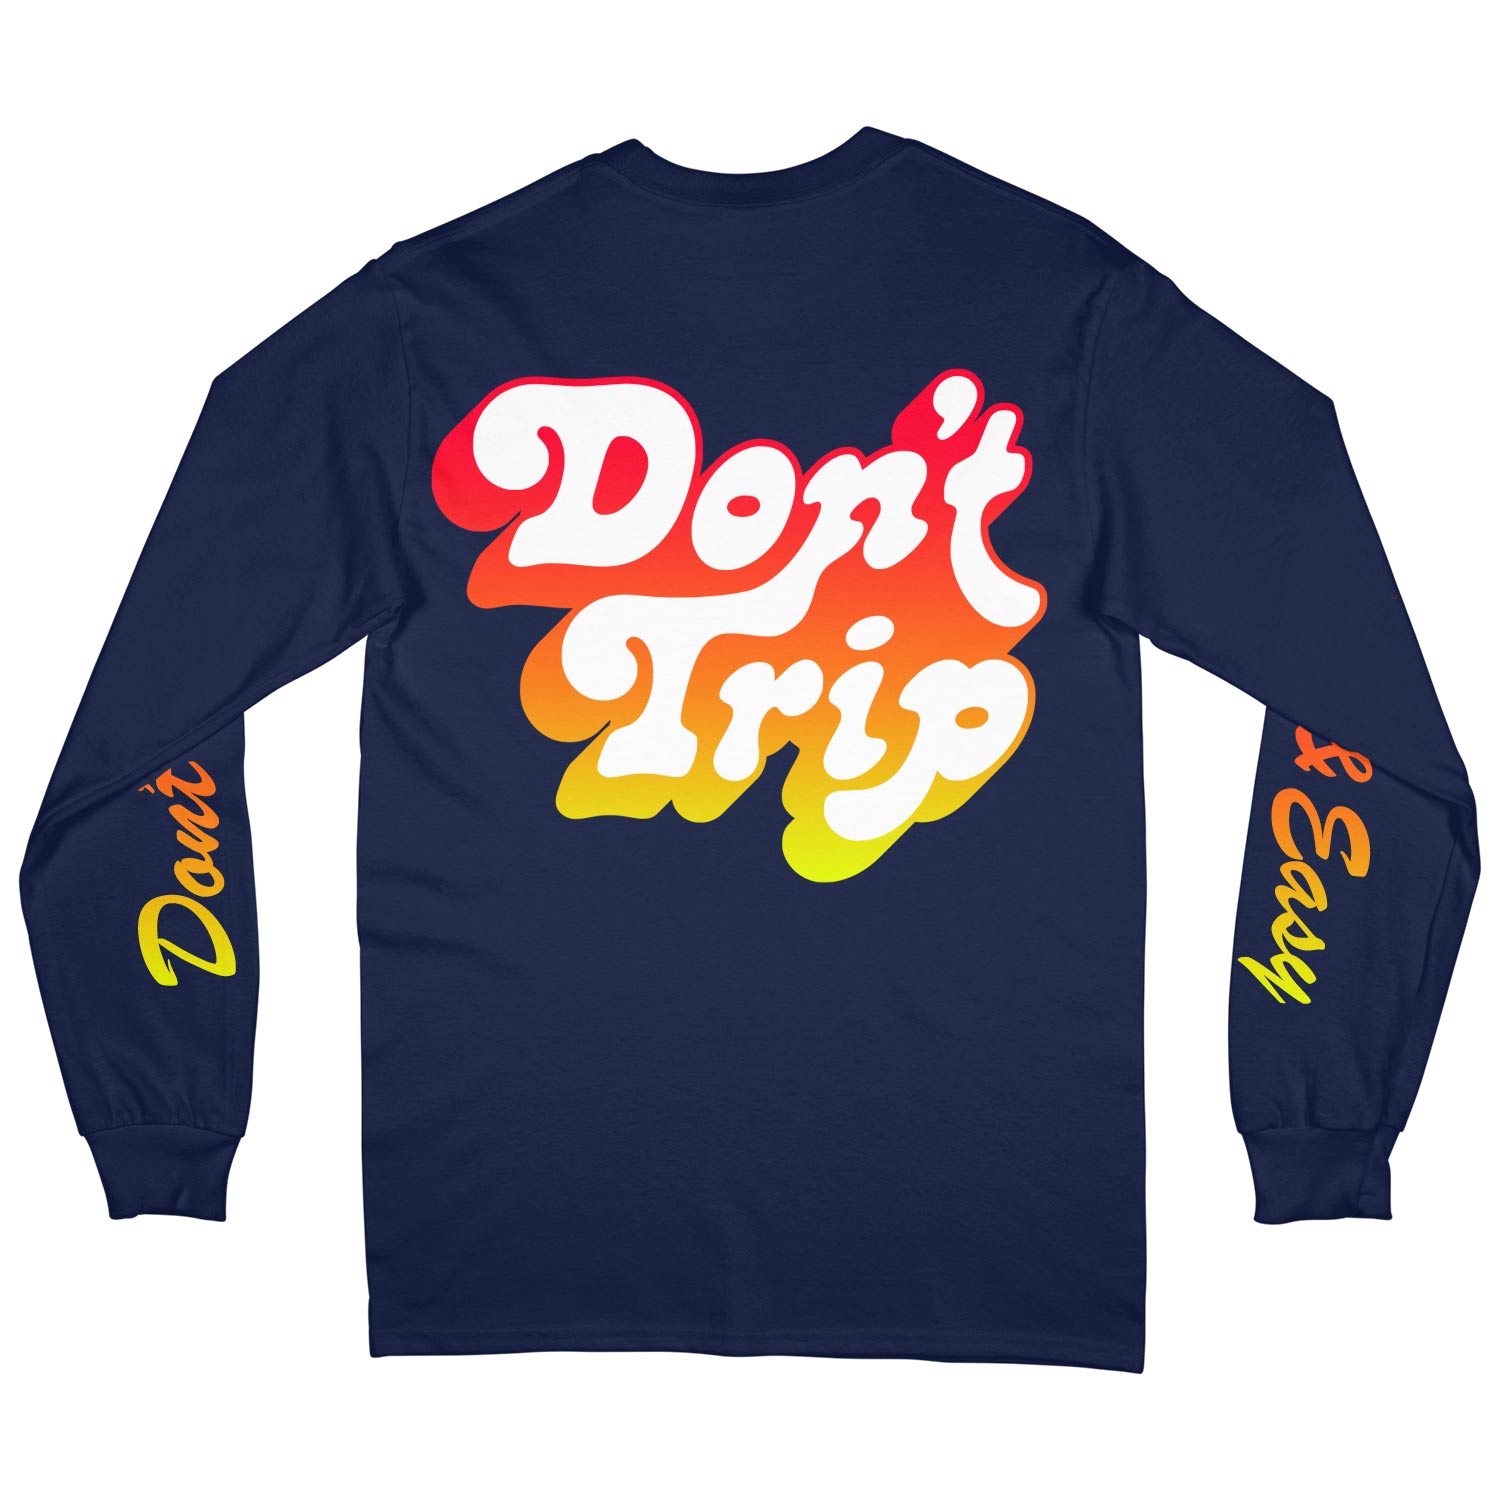 Don't Trip Drop Shadow LS Tee in navy with multicolor Don't Trip design on a white background-Free & Easy